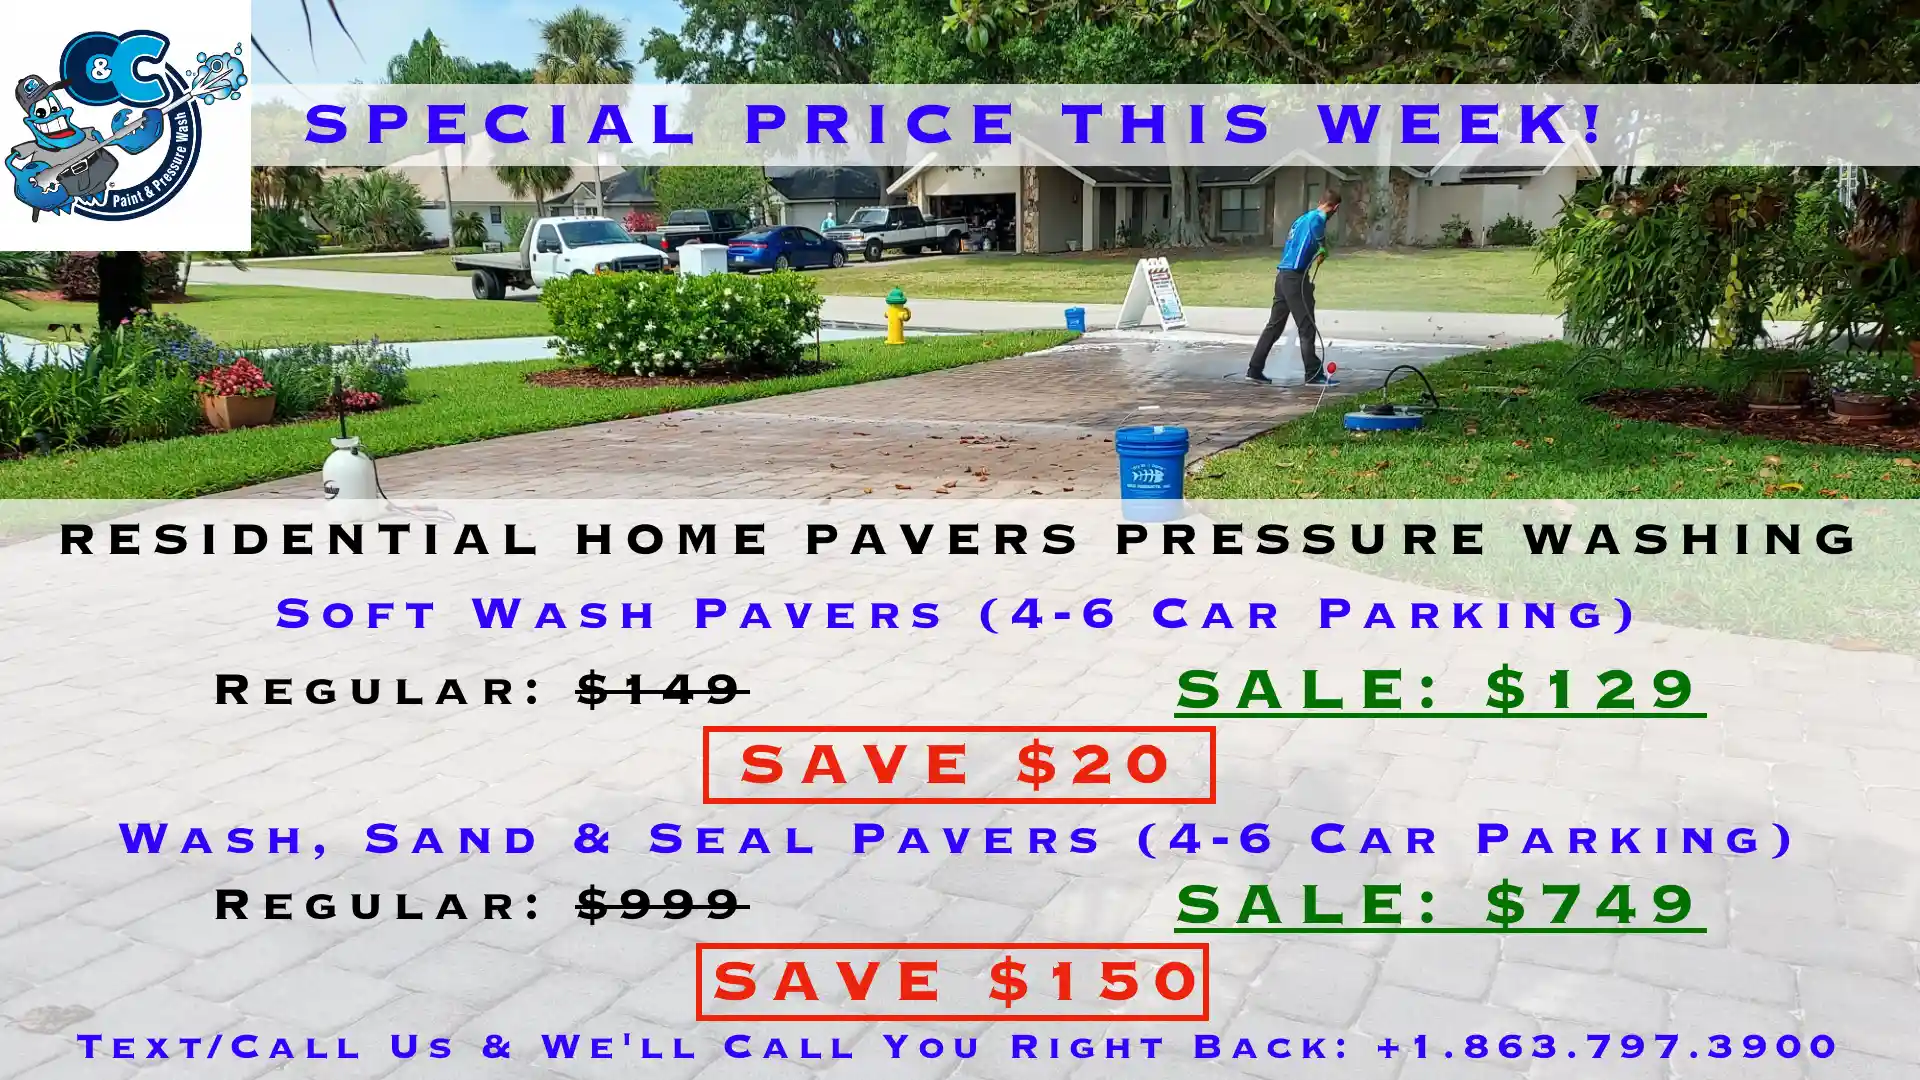 1 - RESIDENTIAL HOME PAVERS PRESSURE WASHING